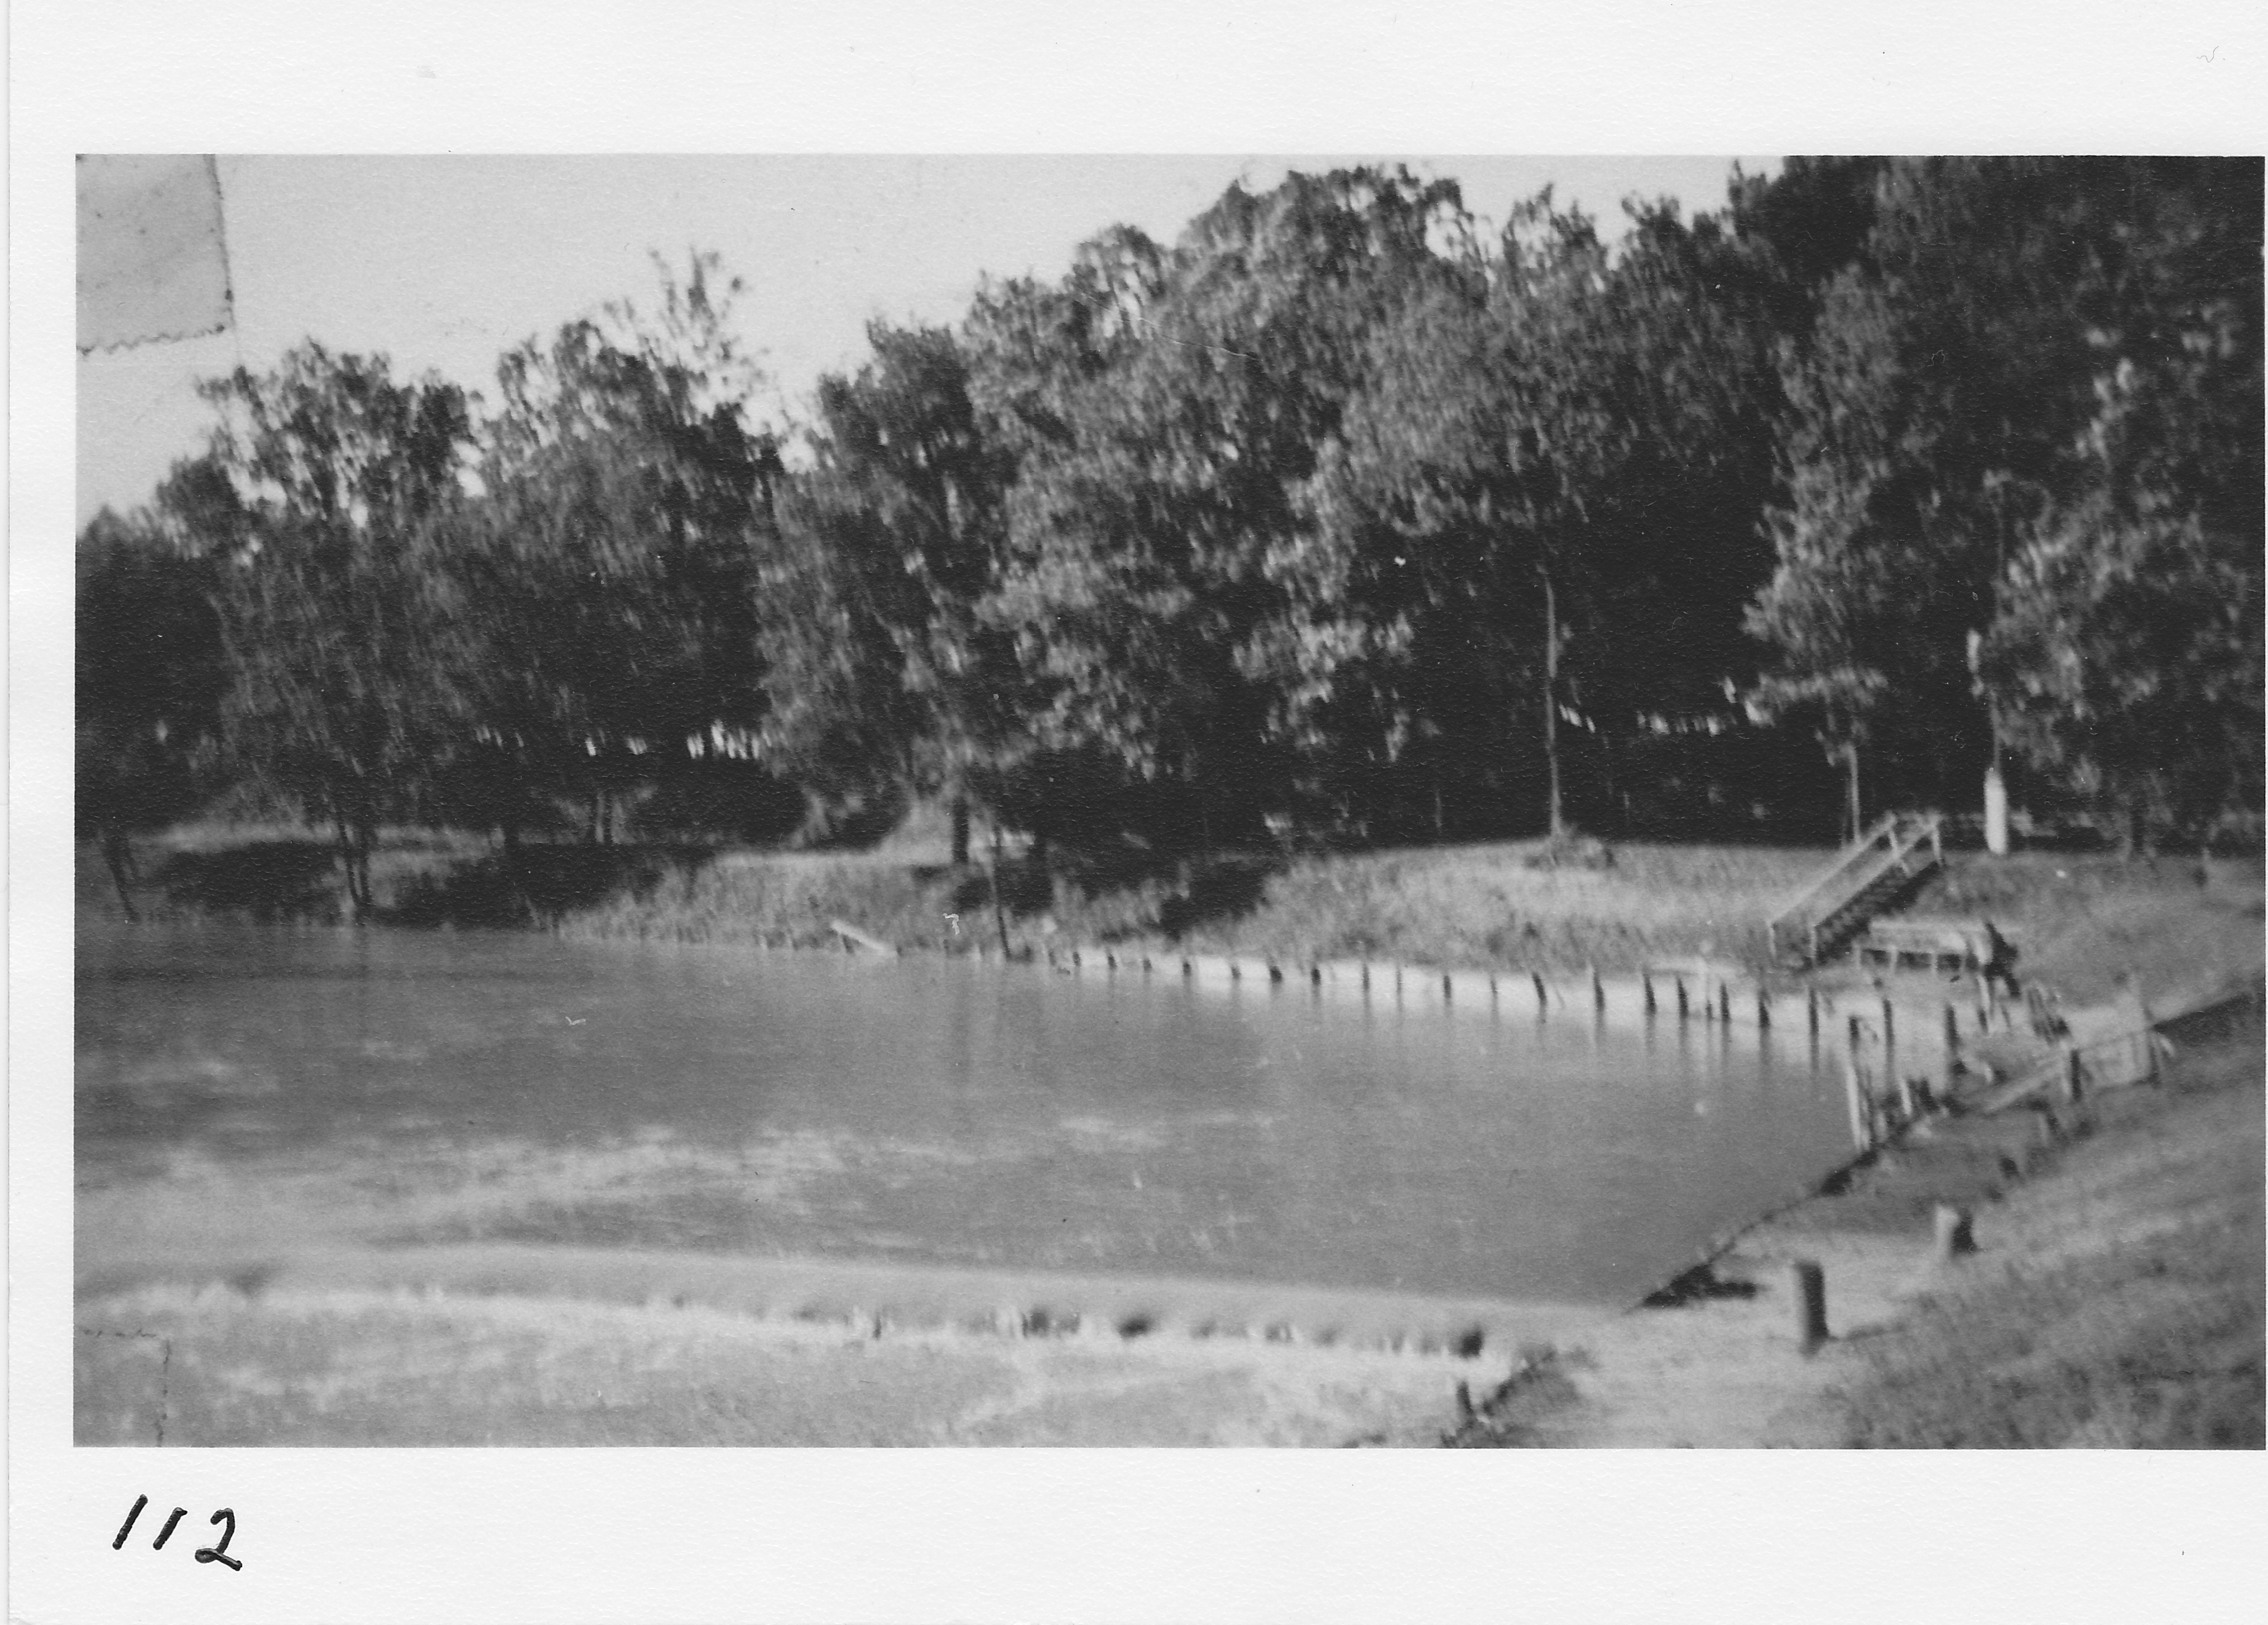 Riverside Park swimming area in 1930s. The site drew hundreds of visitors in hot weather.